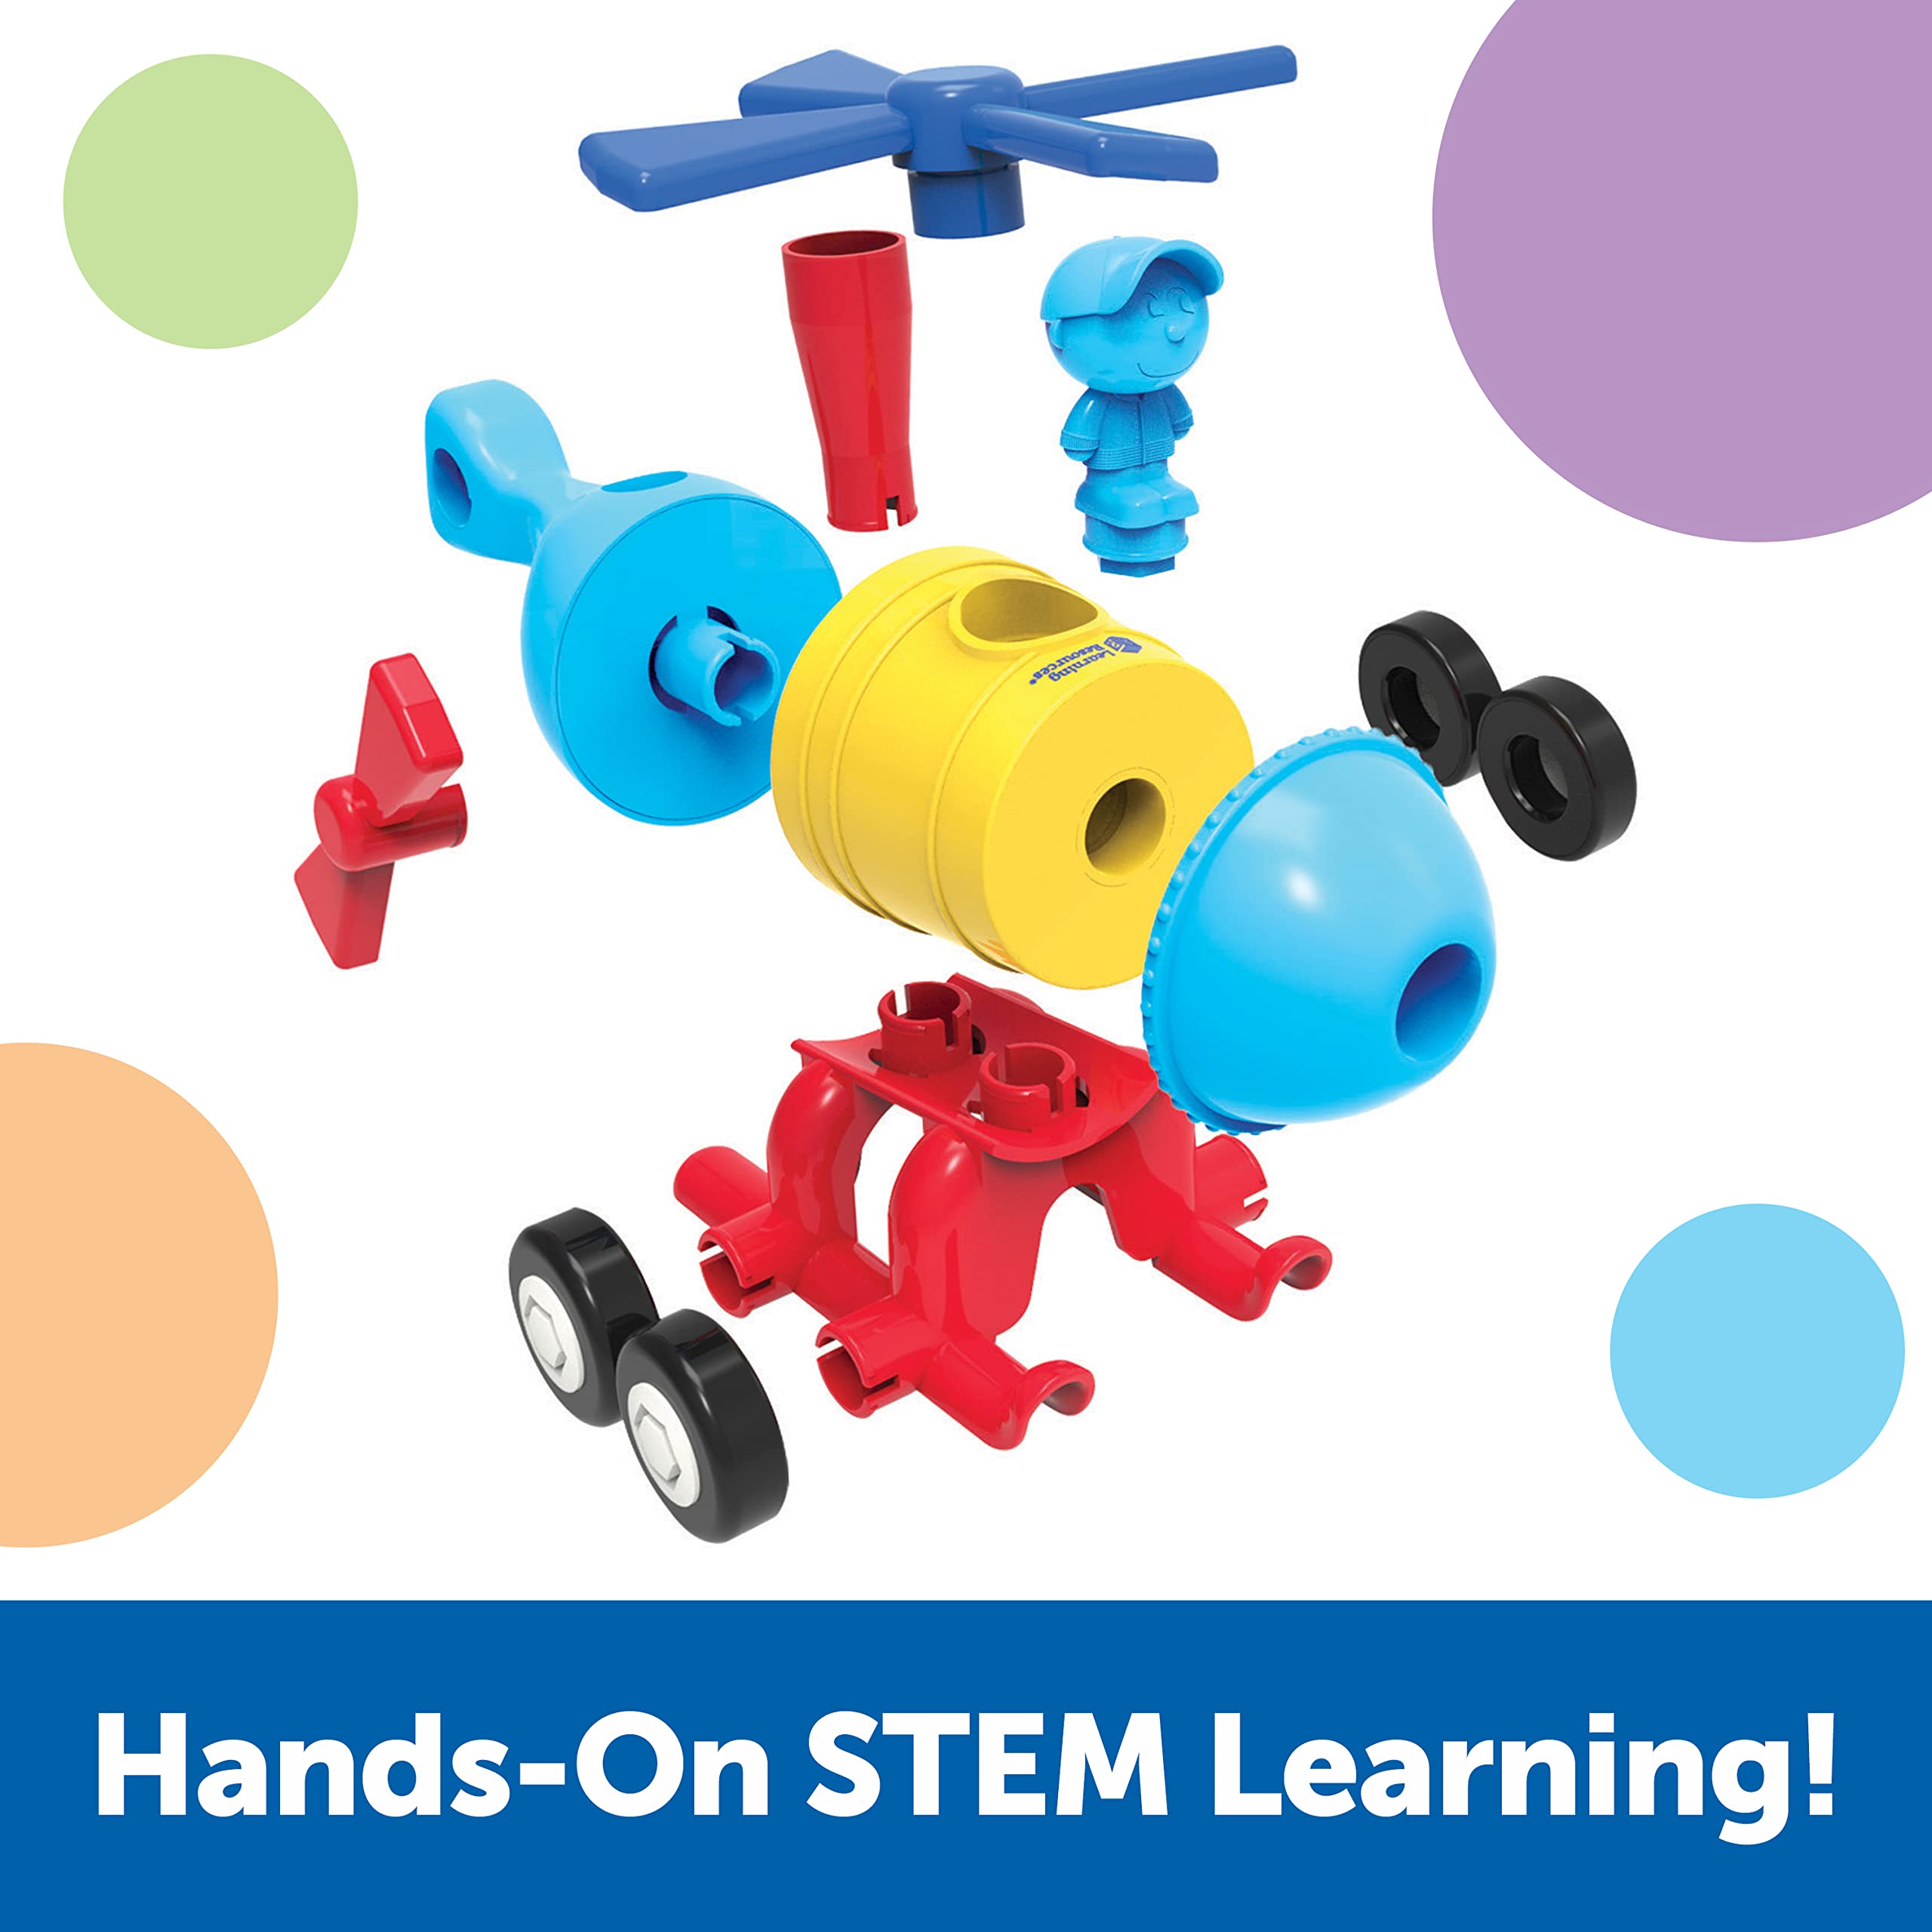 Learning Resources 1-2-3 Build It! Rocket-Train-Helicopter - 17 Pieces, Ages 2+ Toddler Learning Toys, Encourages Creative Thinking, Toddler Building Toy, STEM Toys, Early Engineering Toys